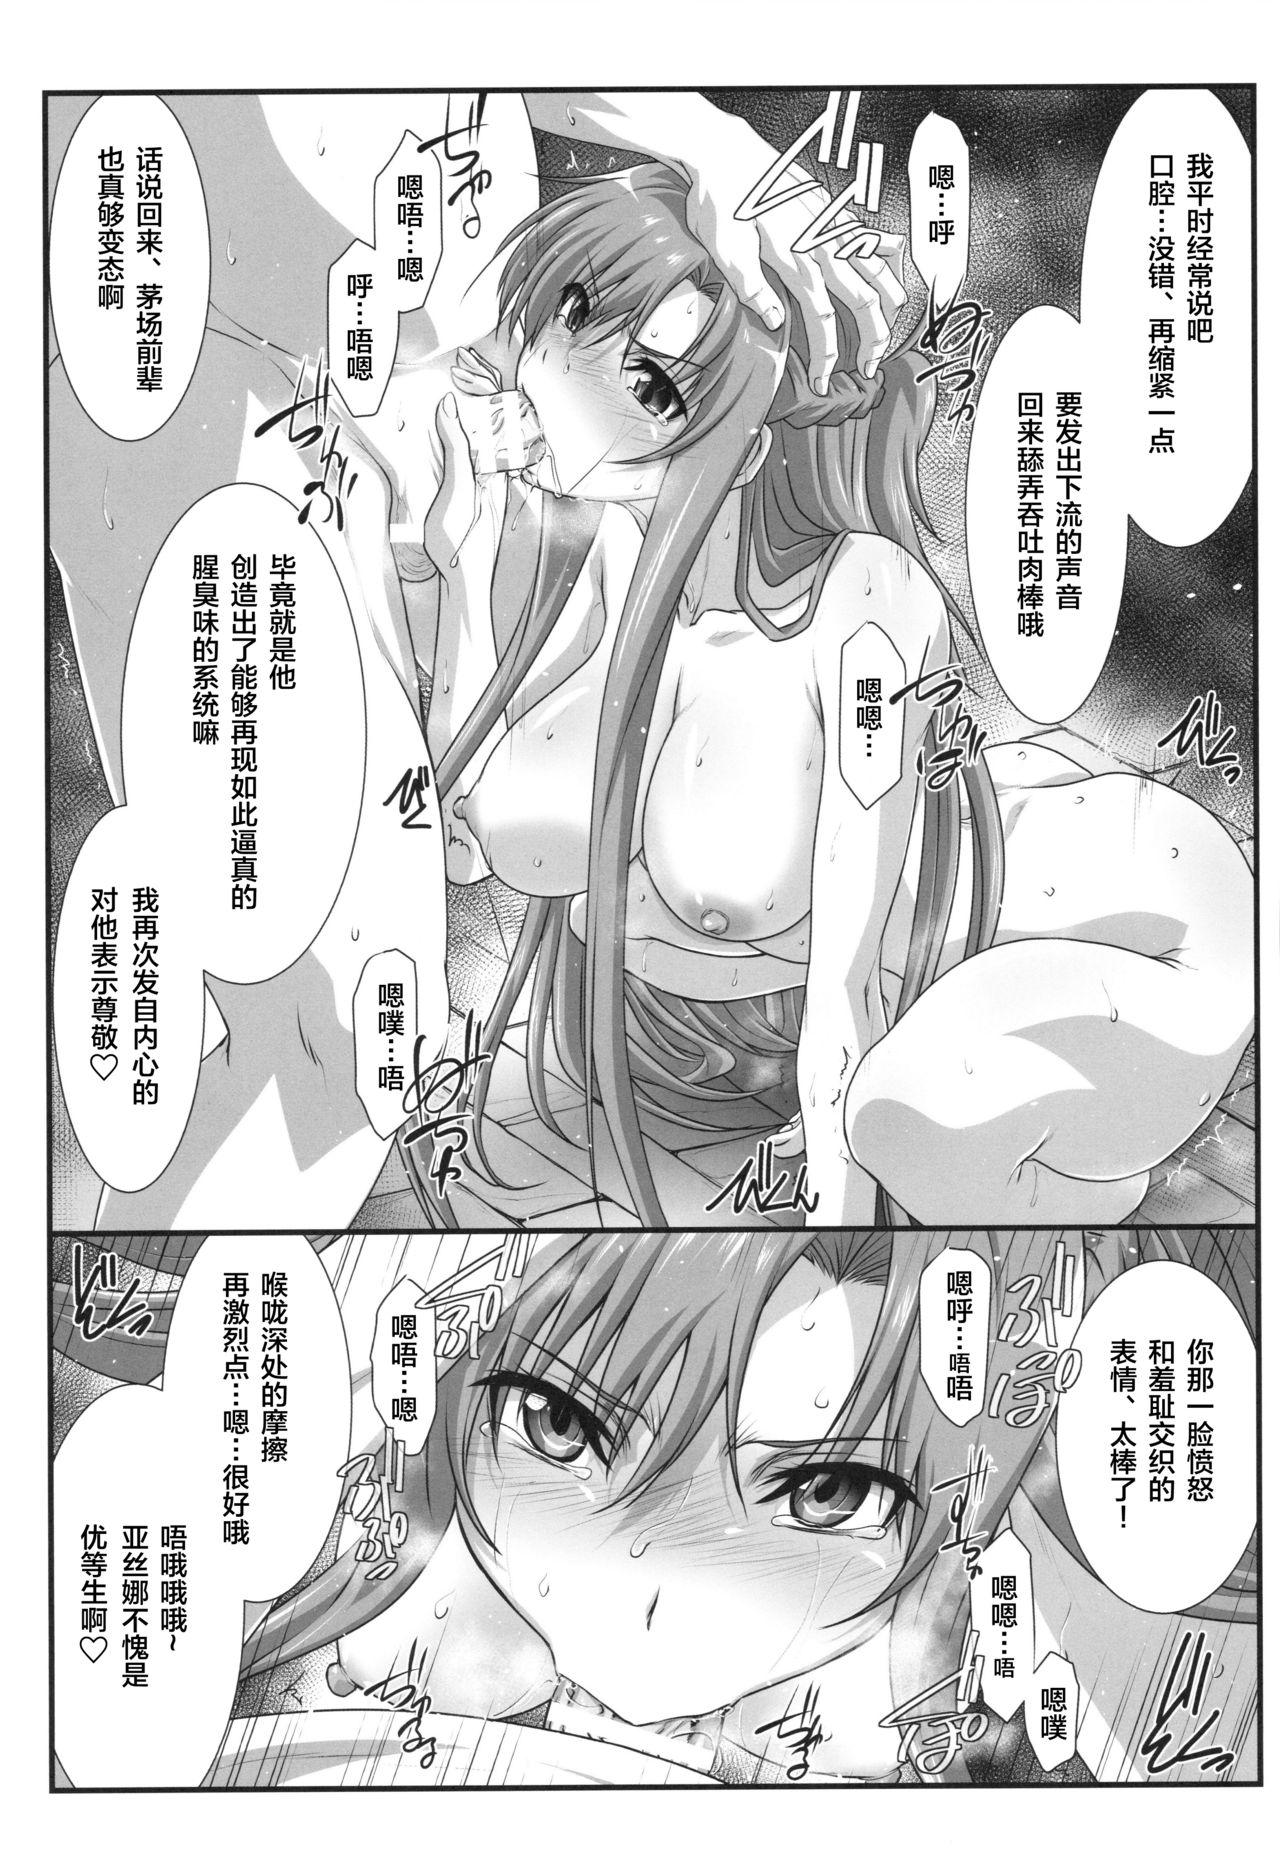 Teenfuns Astral Bout Ver. 41 - Sword art online Bisexual - Page 6